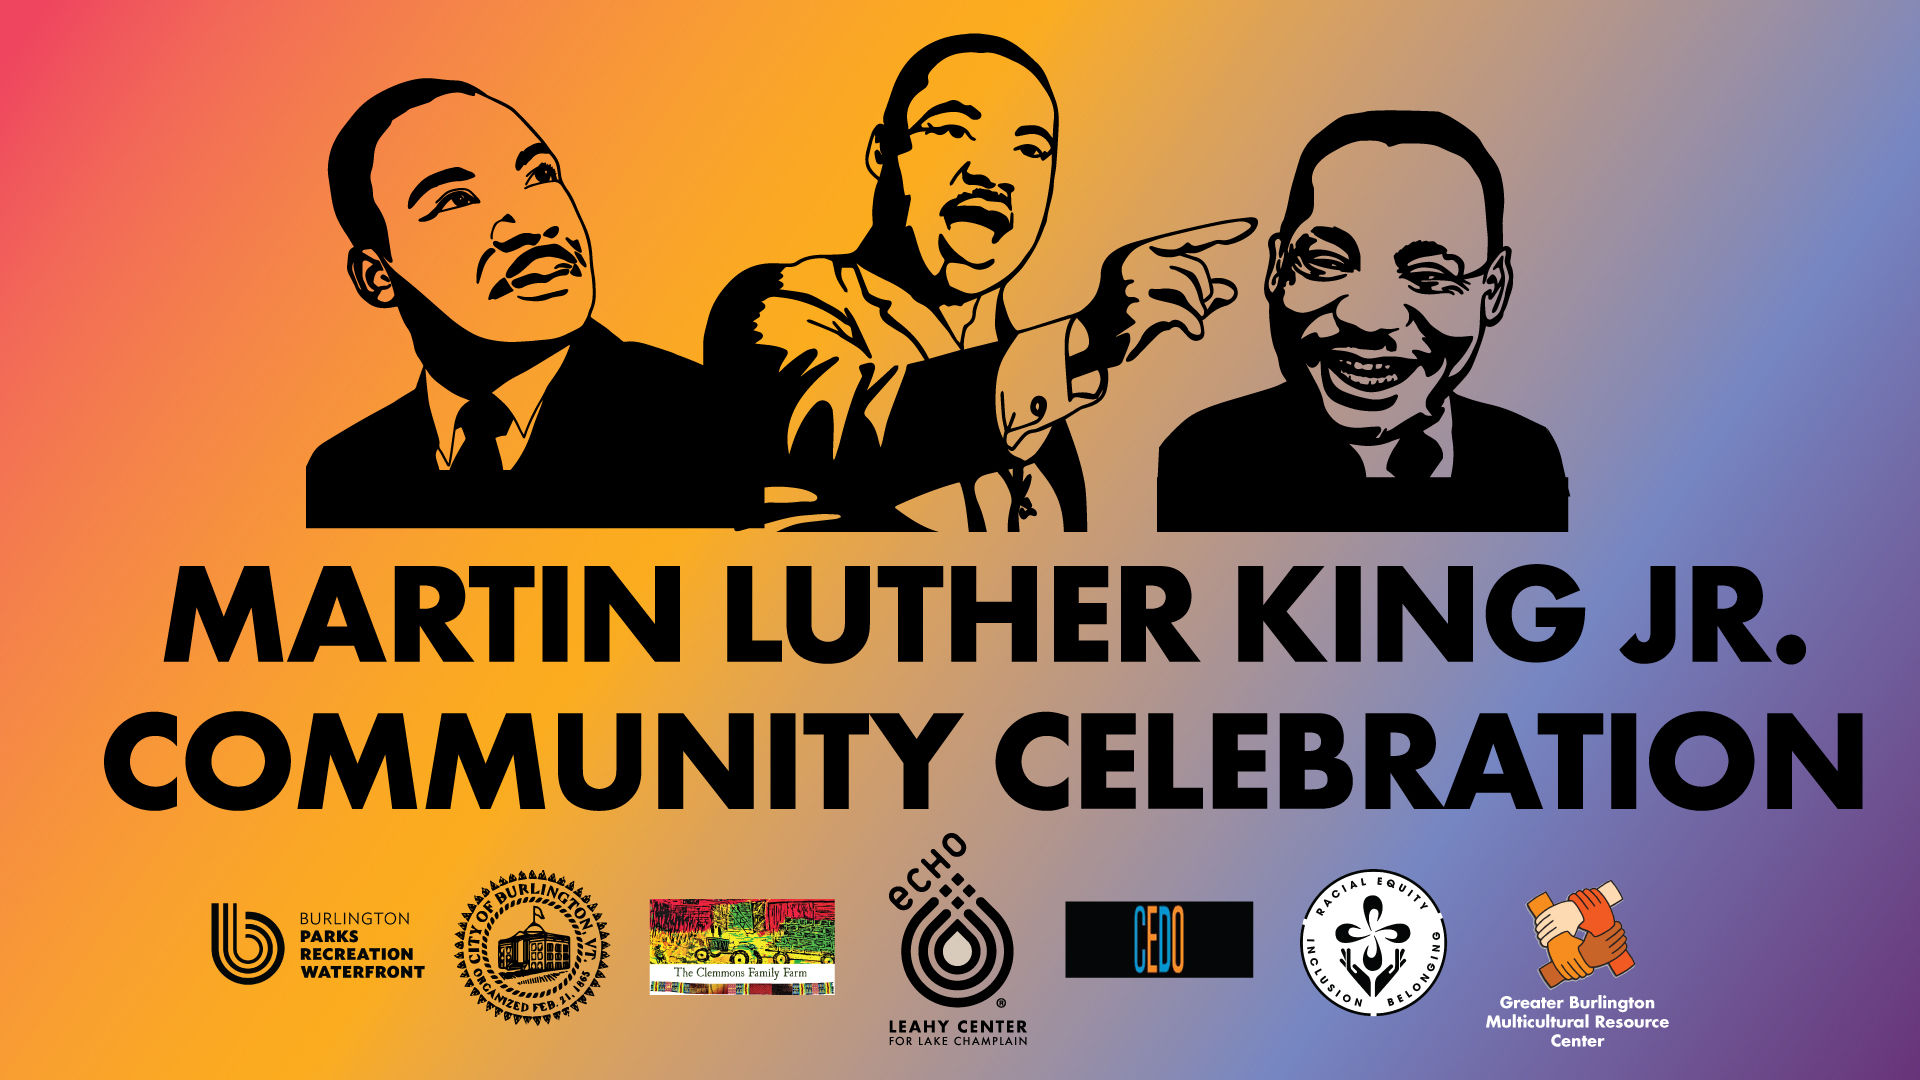 Image has a gradient of orange, yellow, and purple with black outline illustrations of Martin Luther Jr. smiling, talking, pointing. Text says "MARTIN LUTHER KING JR. COMMUNITY CELEBRATION" and has logos from community members.